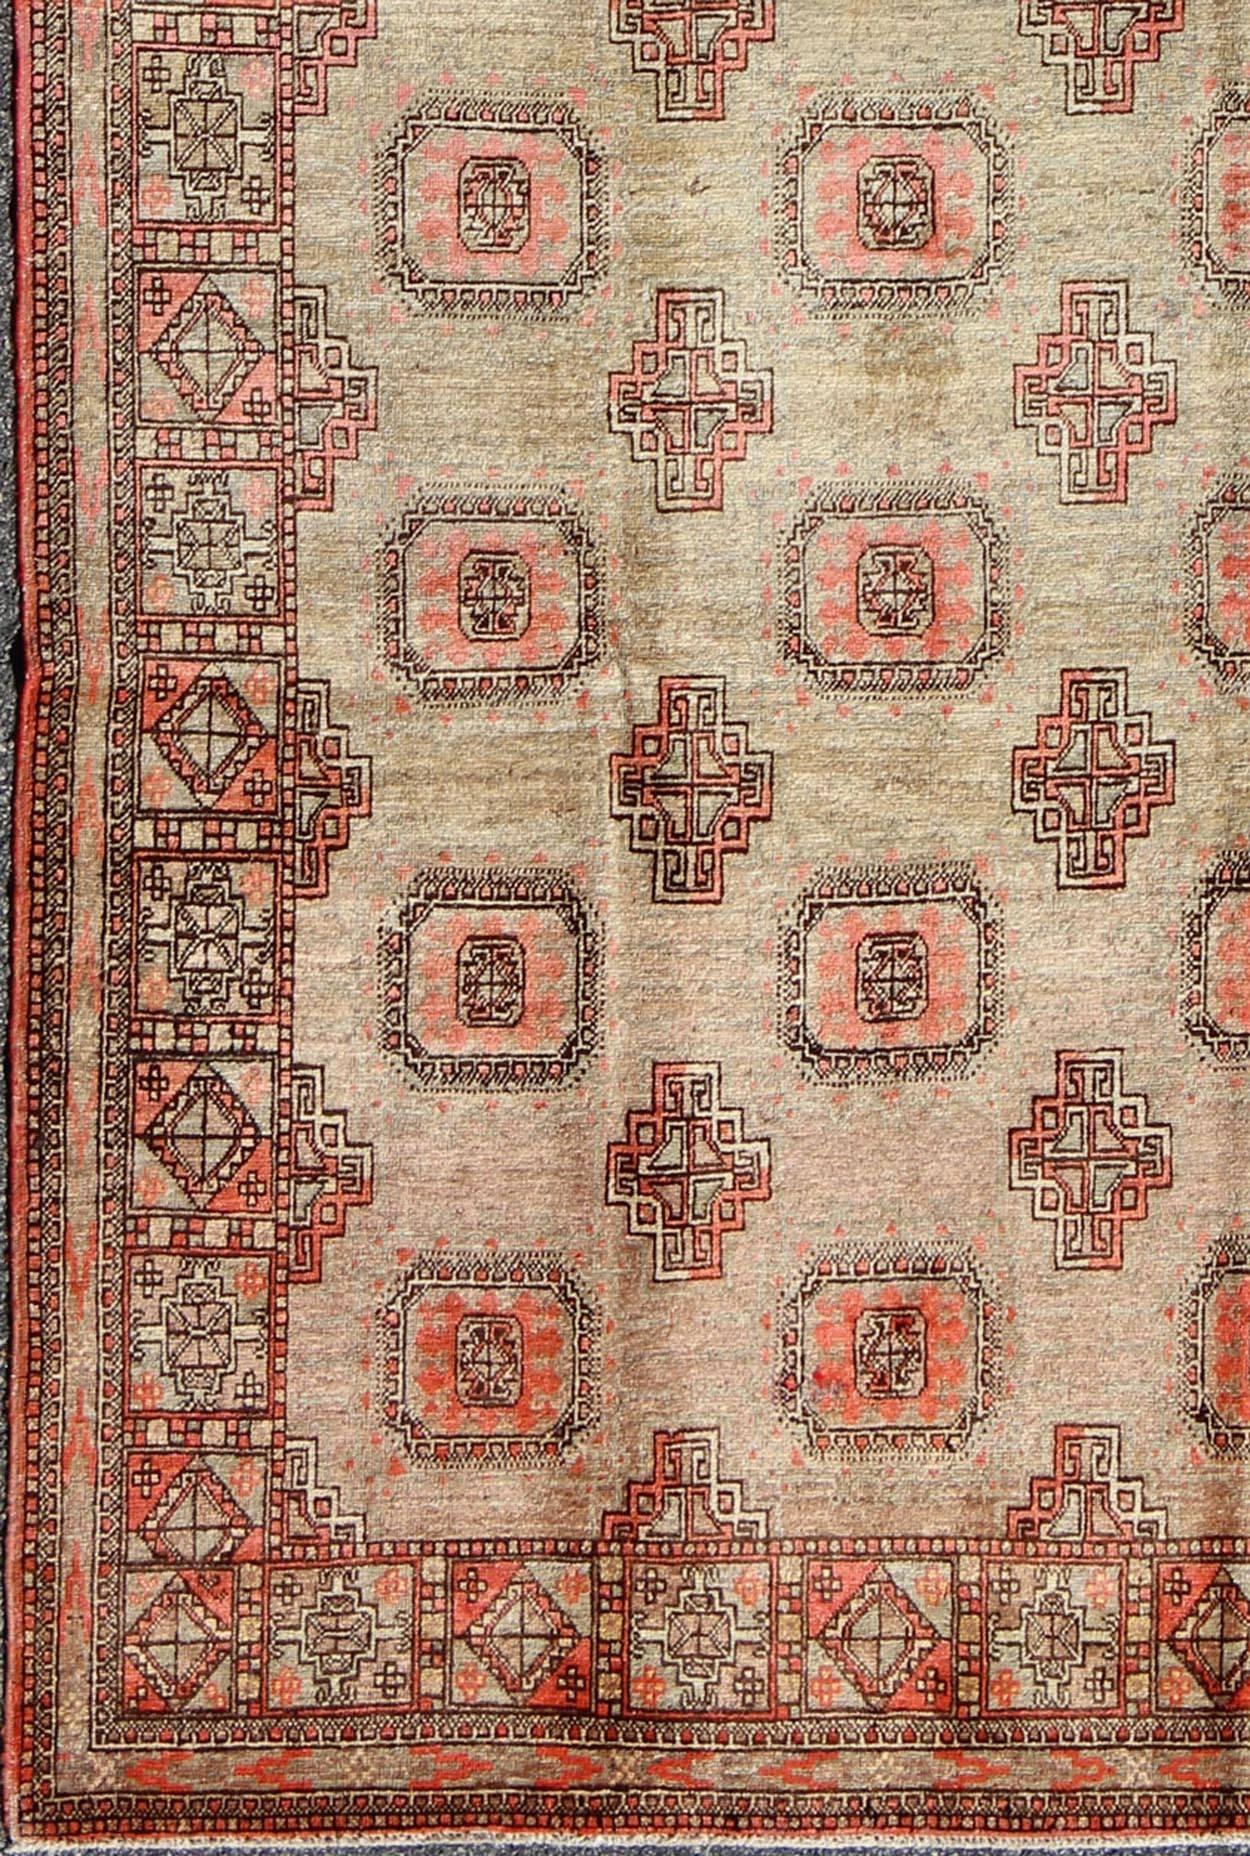 Early 20th century antique Khotan rug with all-over geometric blossom design, rug mp-1301-214, country of origin / type: East Turkestan / Khotan, circa 1920

This attractive antique Khotan rug (circa 1920) is a spectacular testament to the